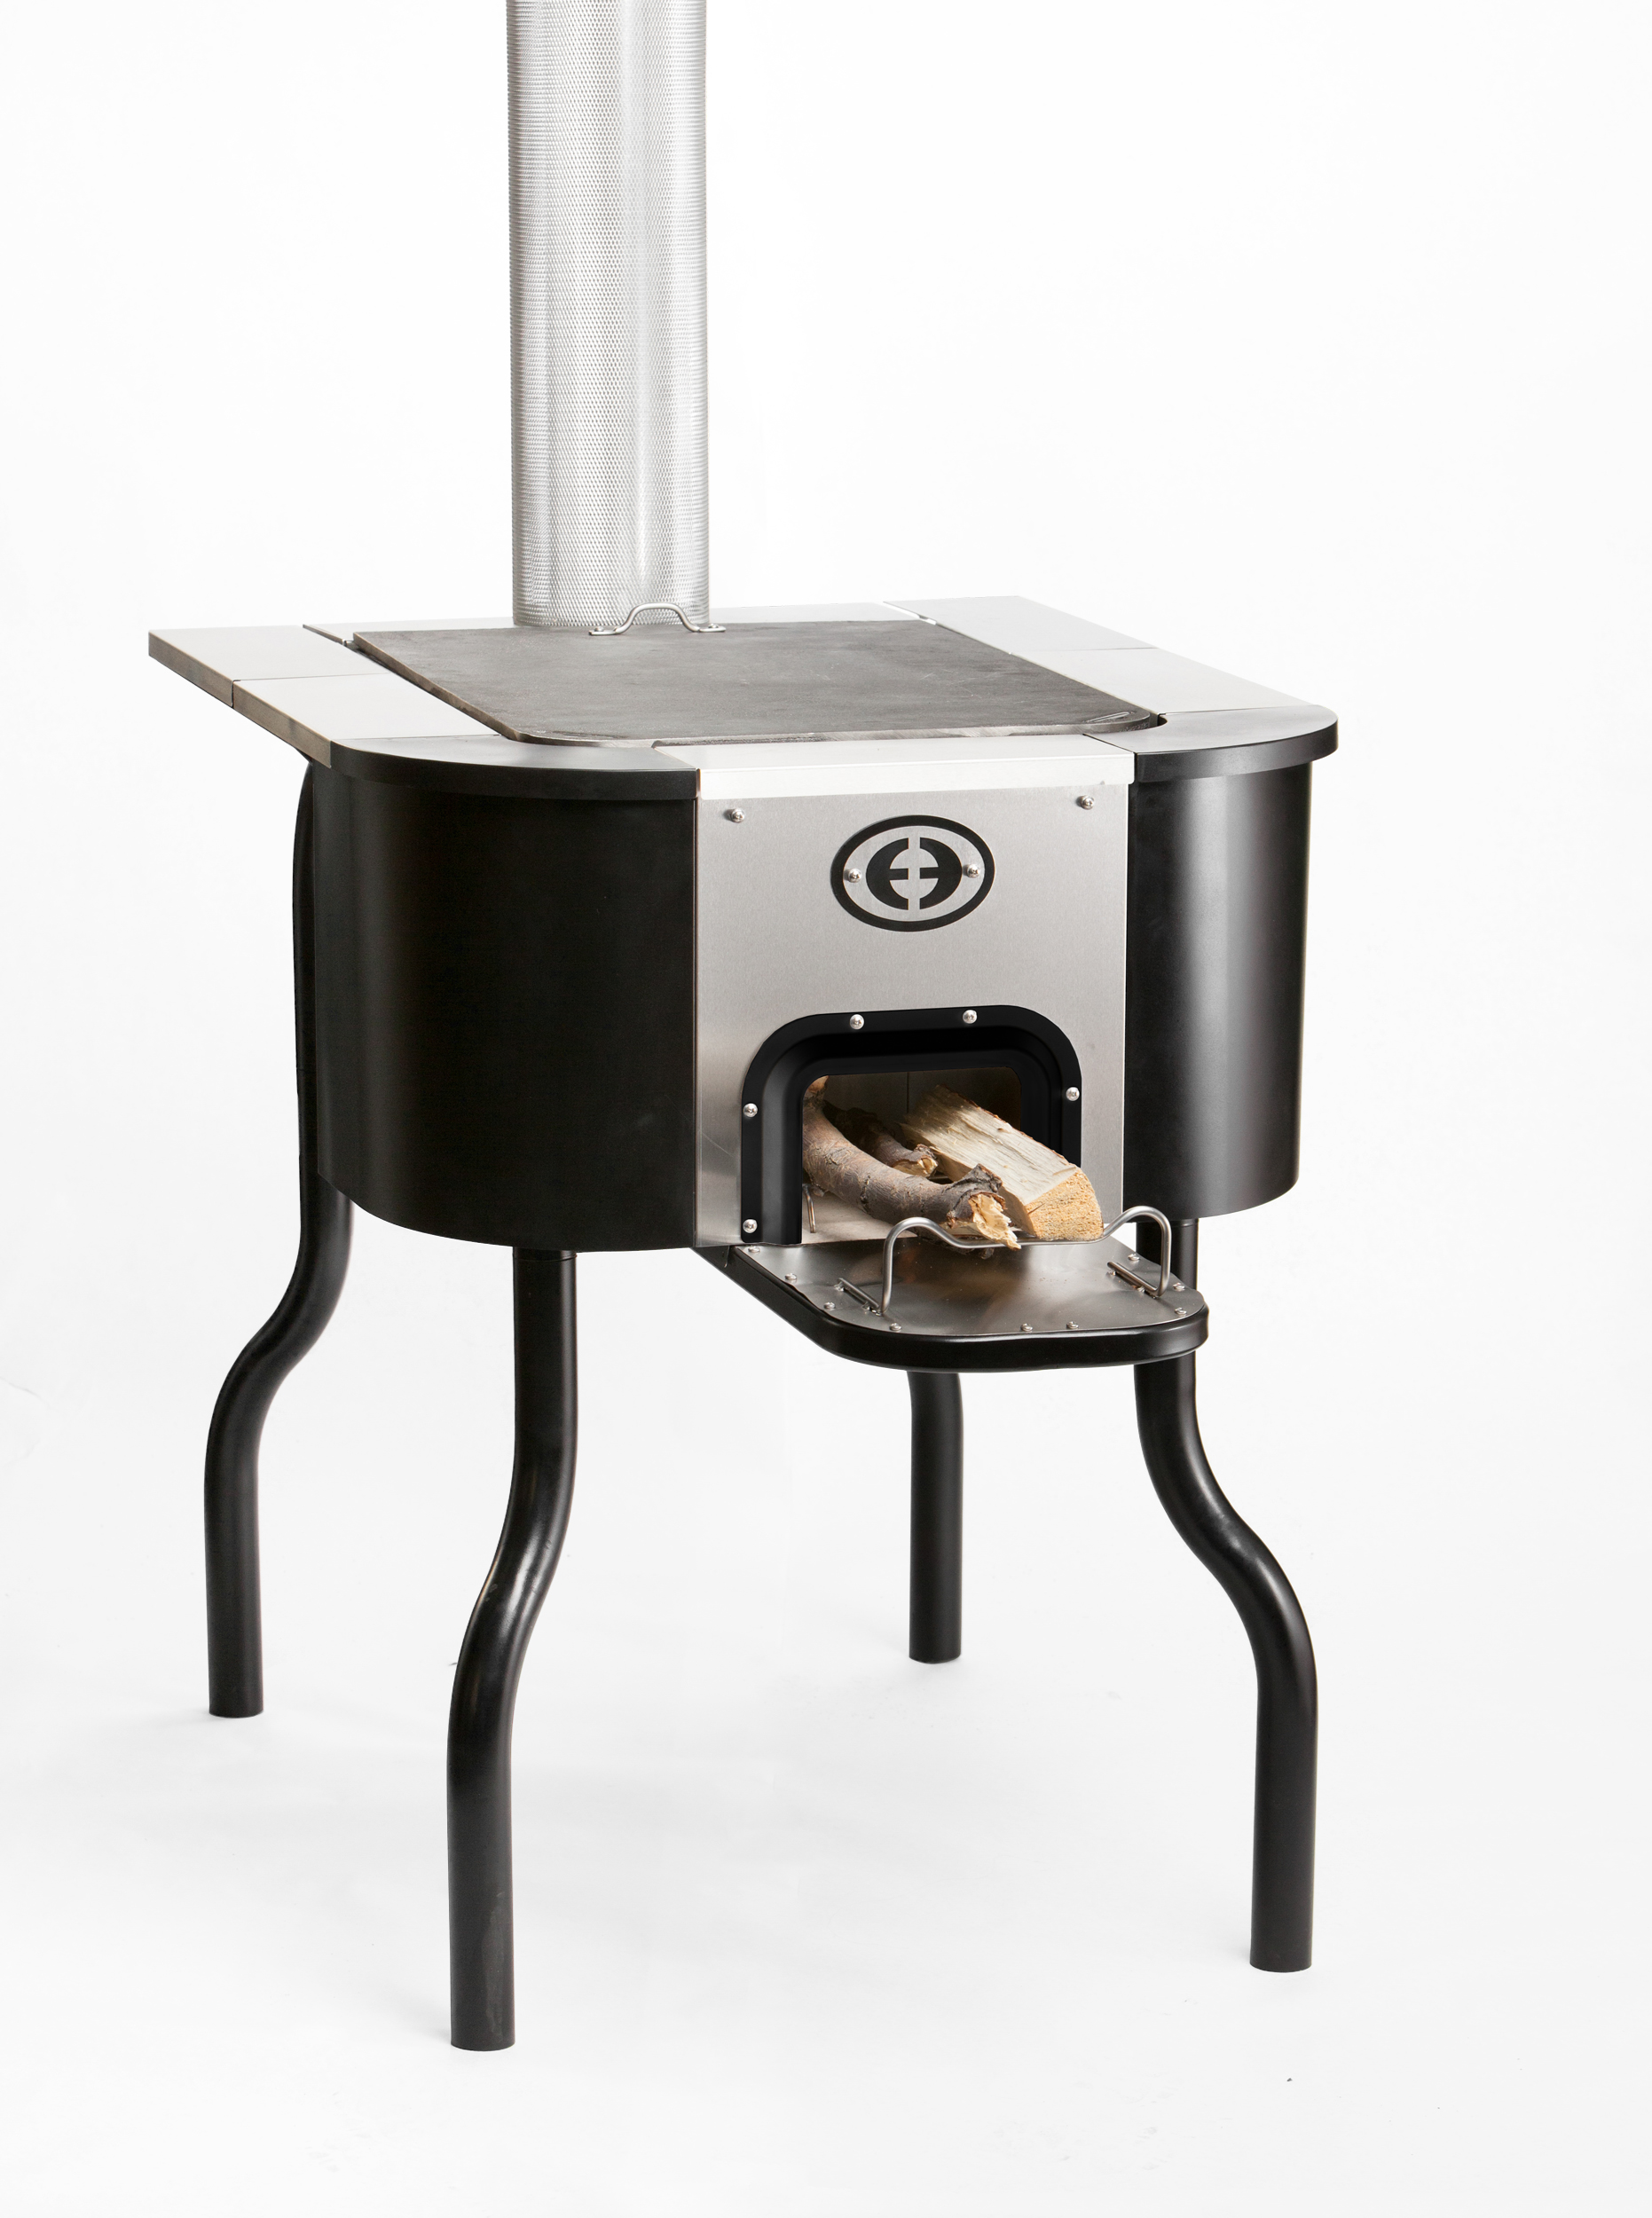 SuperSaver Griddle Cookstove